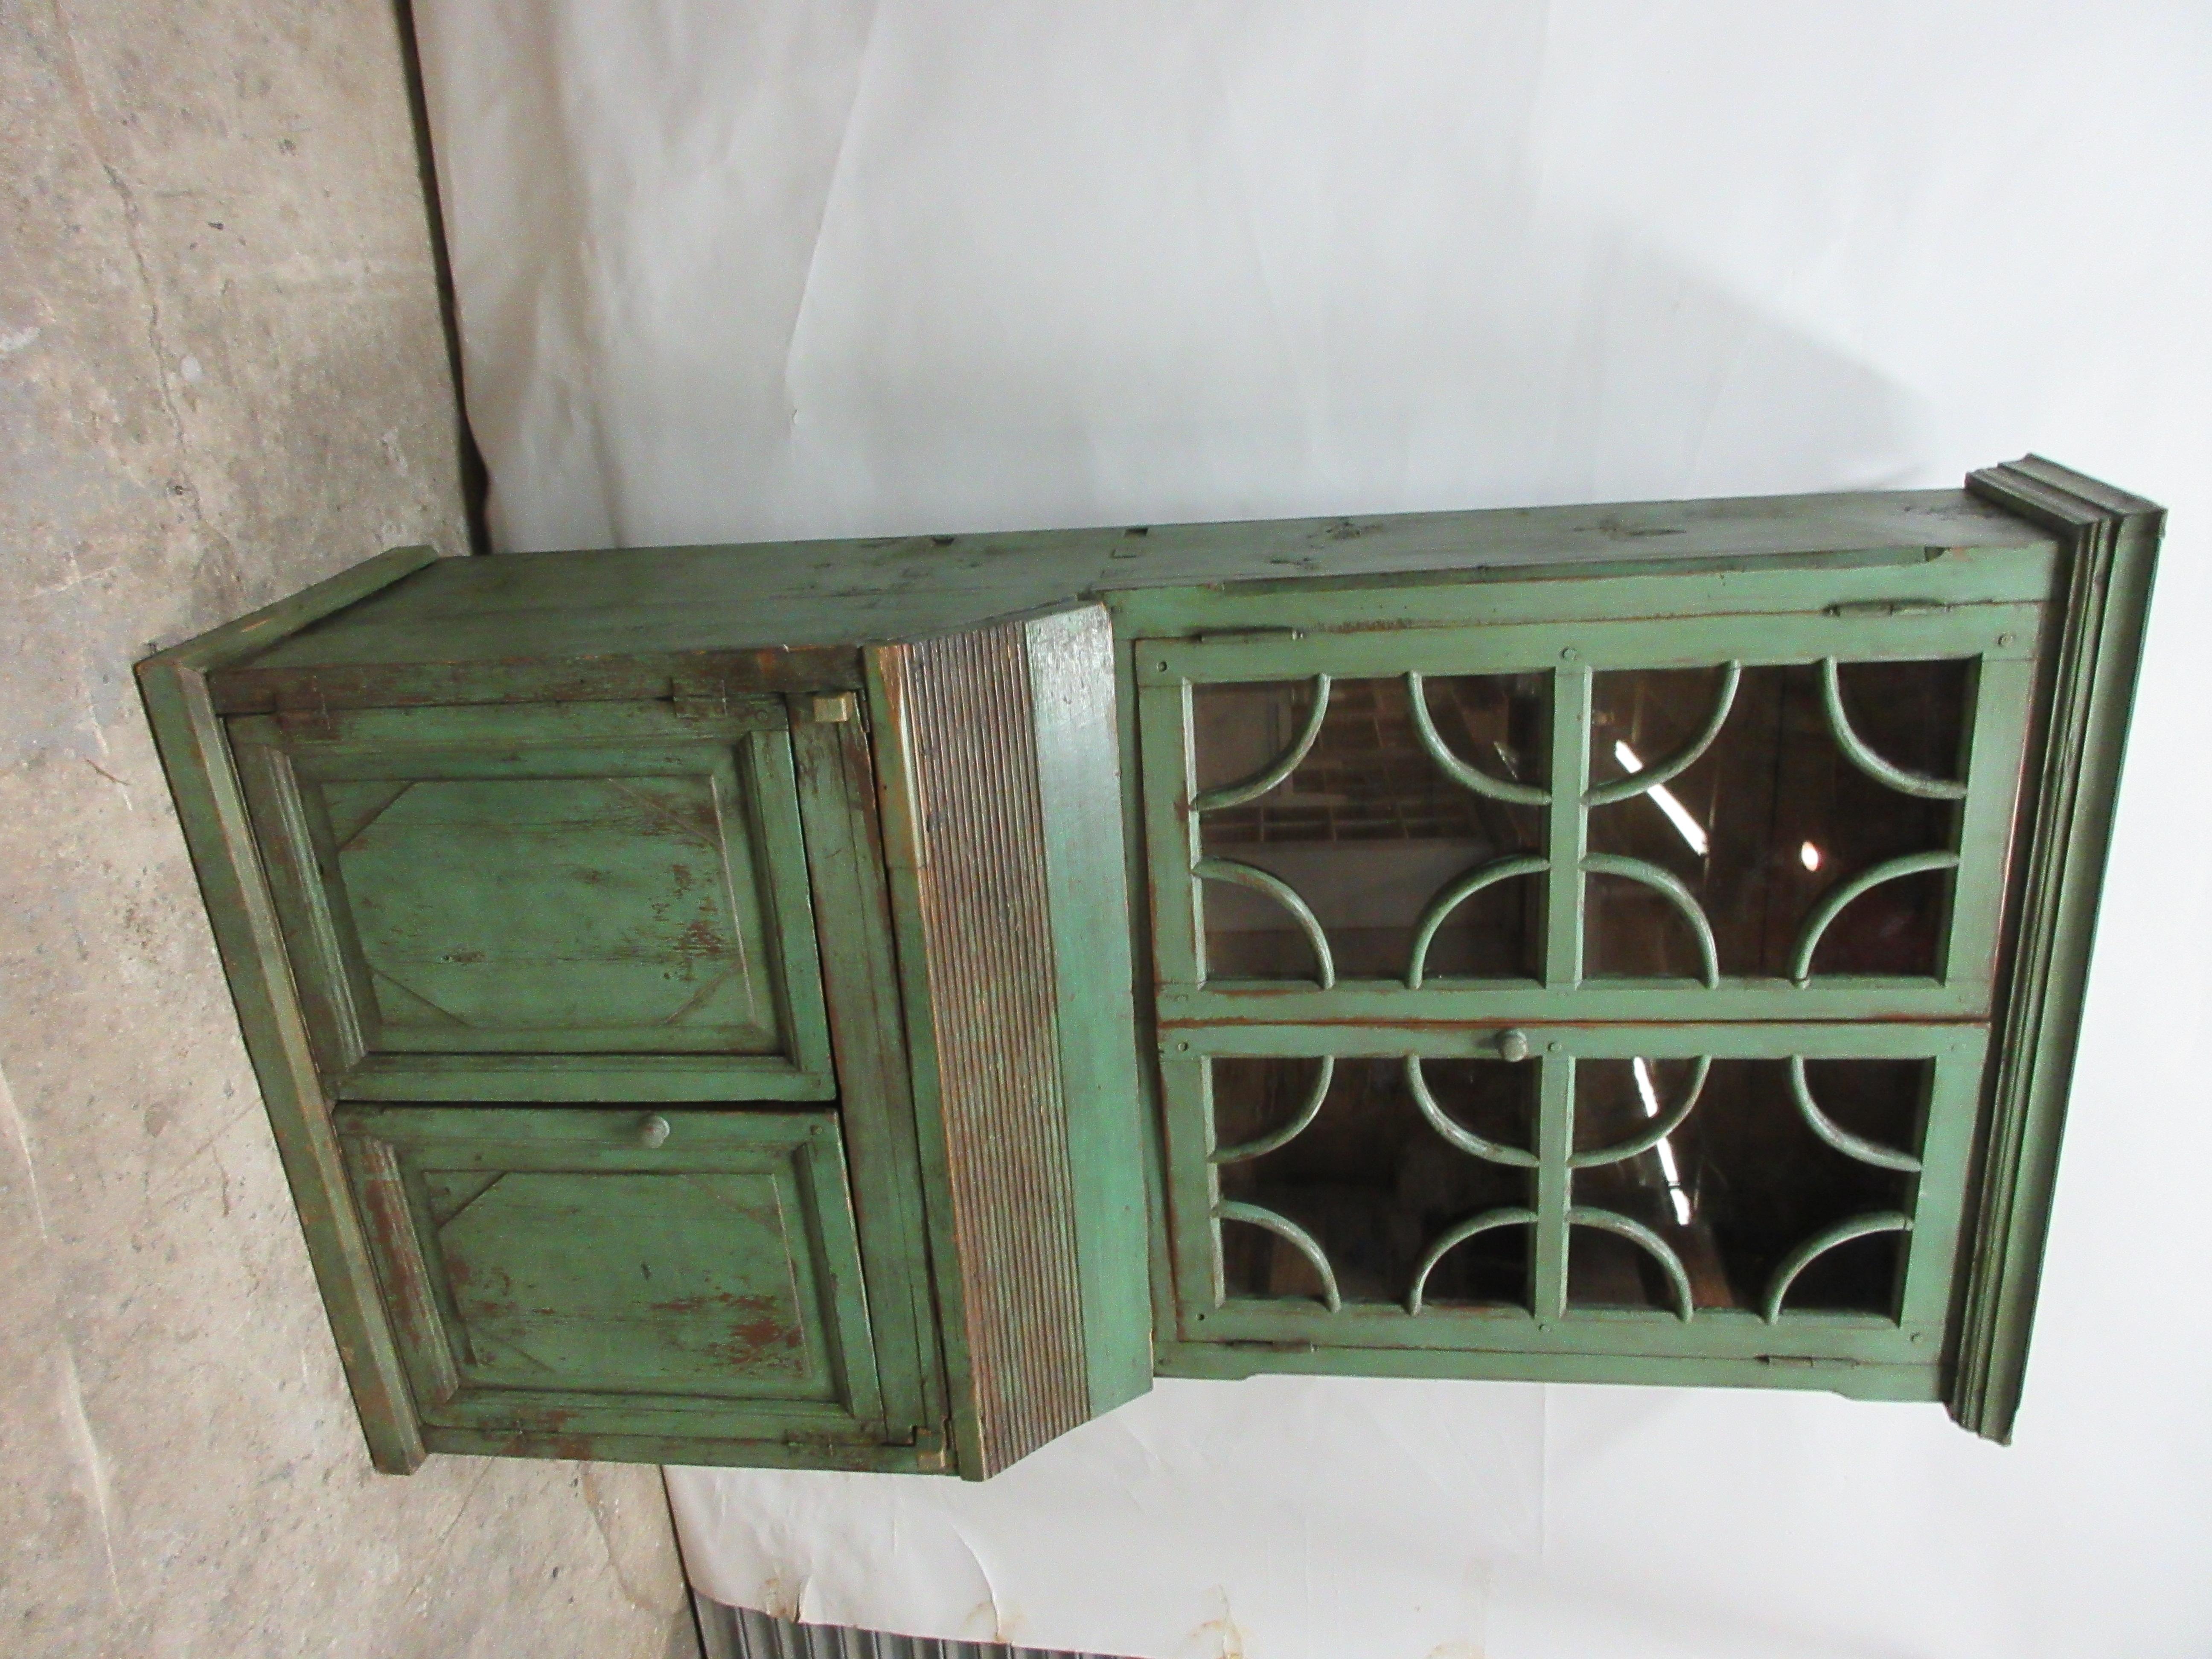 This is an original painted Swedish secretary hutch. Nothing has been done to it to alter its Original condition. This is a 1 piece Secretary cabinet.